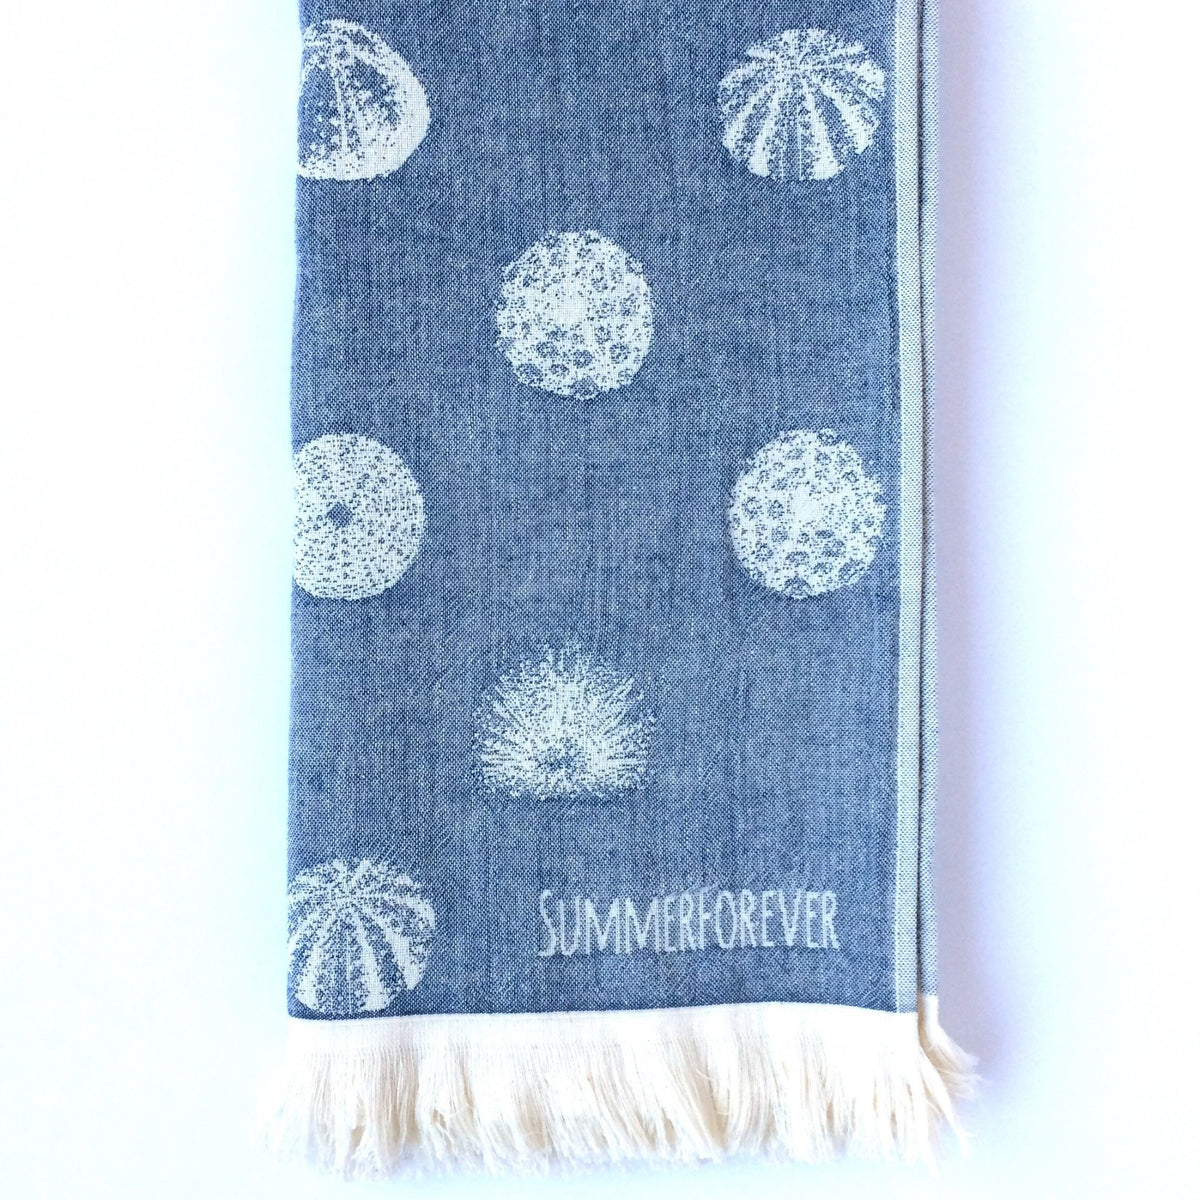 Turkish Towel with Different Sea Urchin Designs, Navy, off white, Double Sided, Reversible, for Beach or Bath, absorbent, very durable 